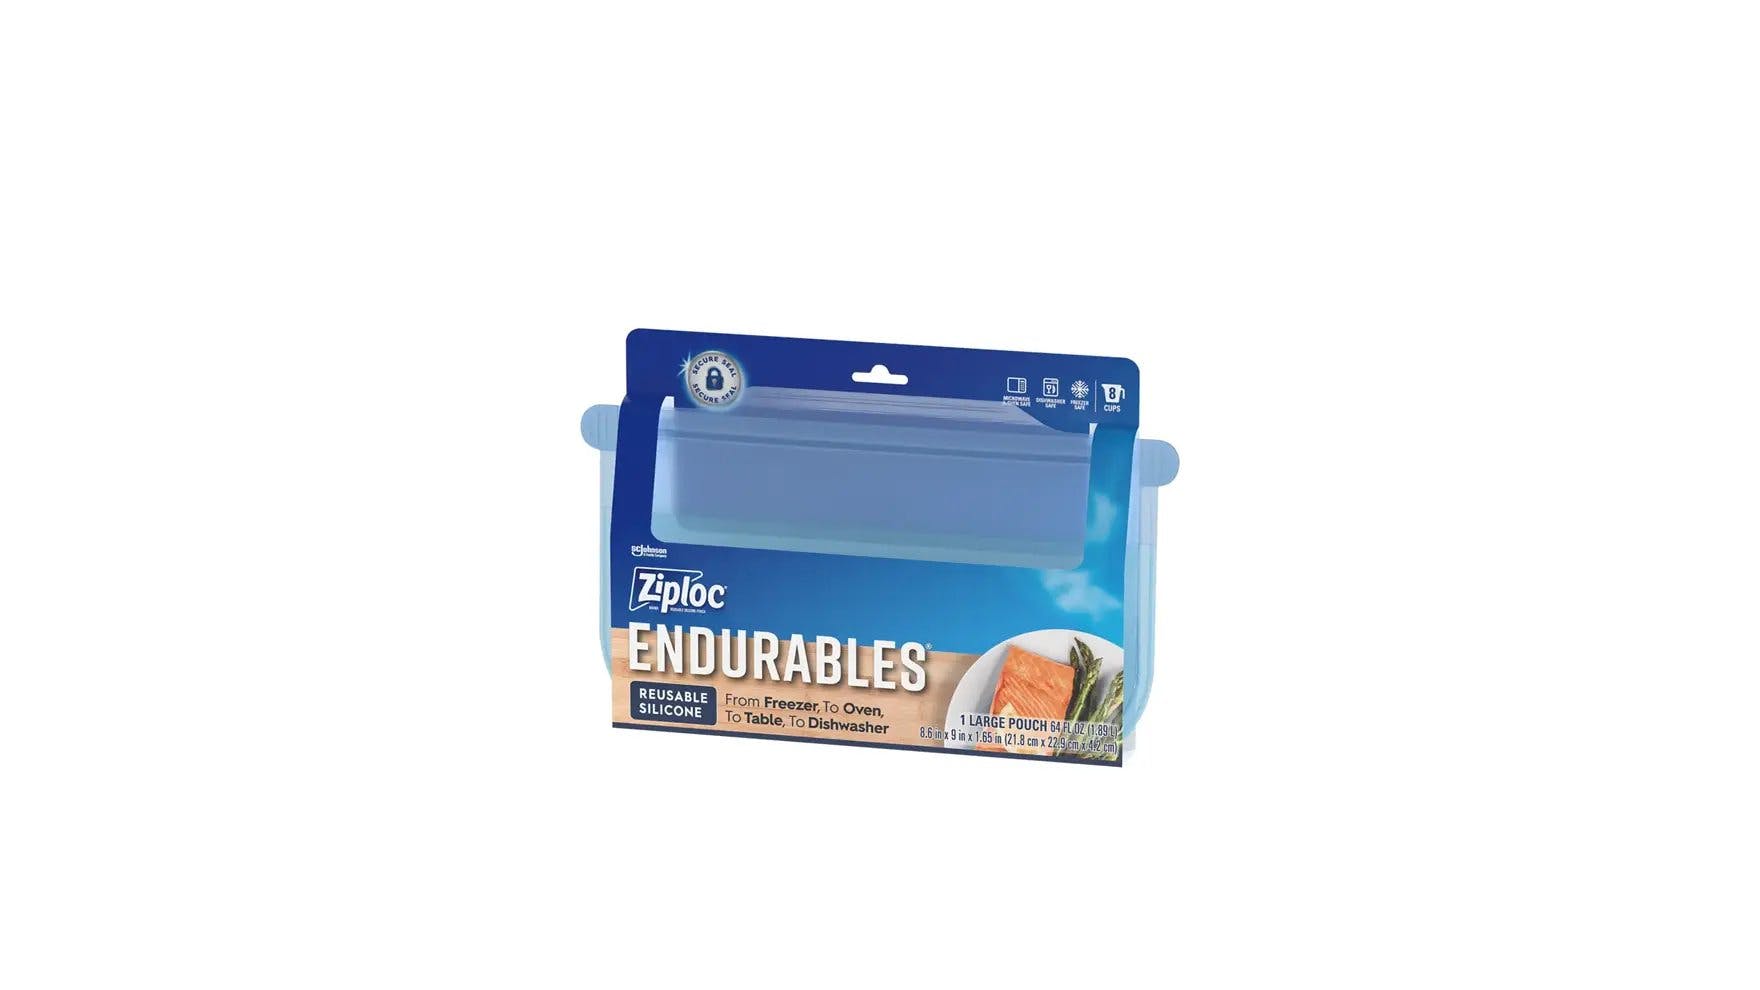 Front of Ziploc Endurables large pouches packaging.